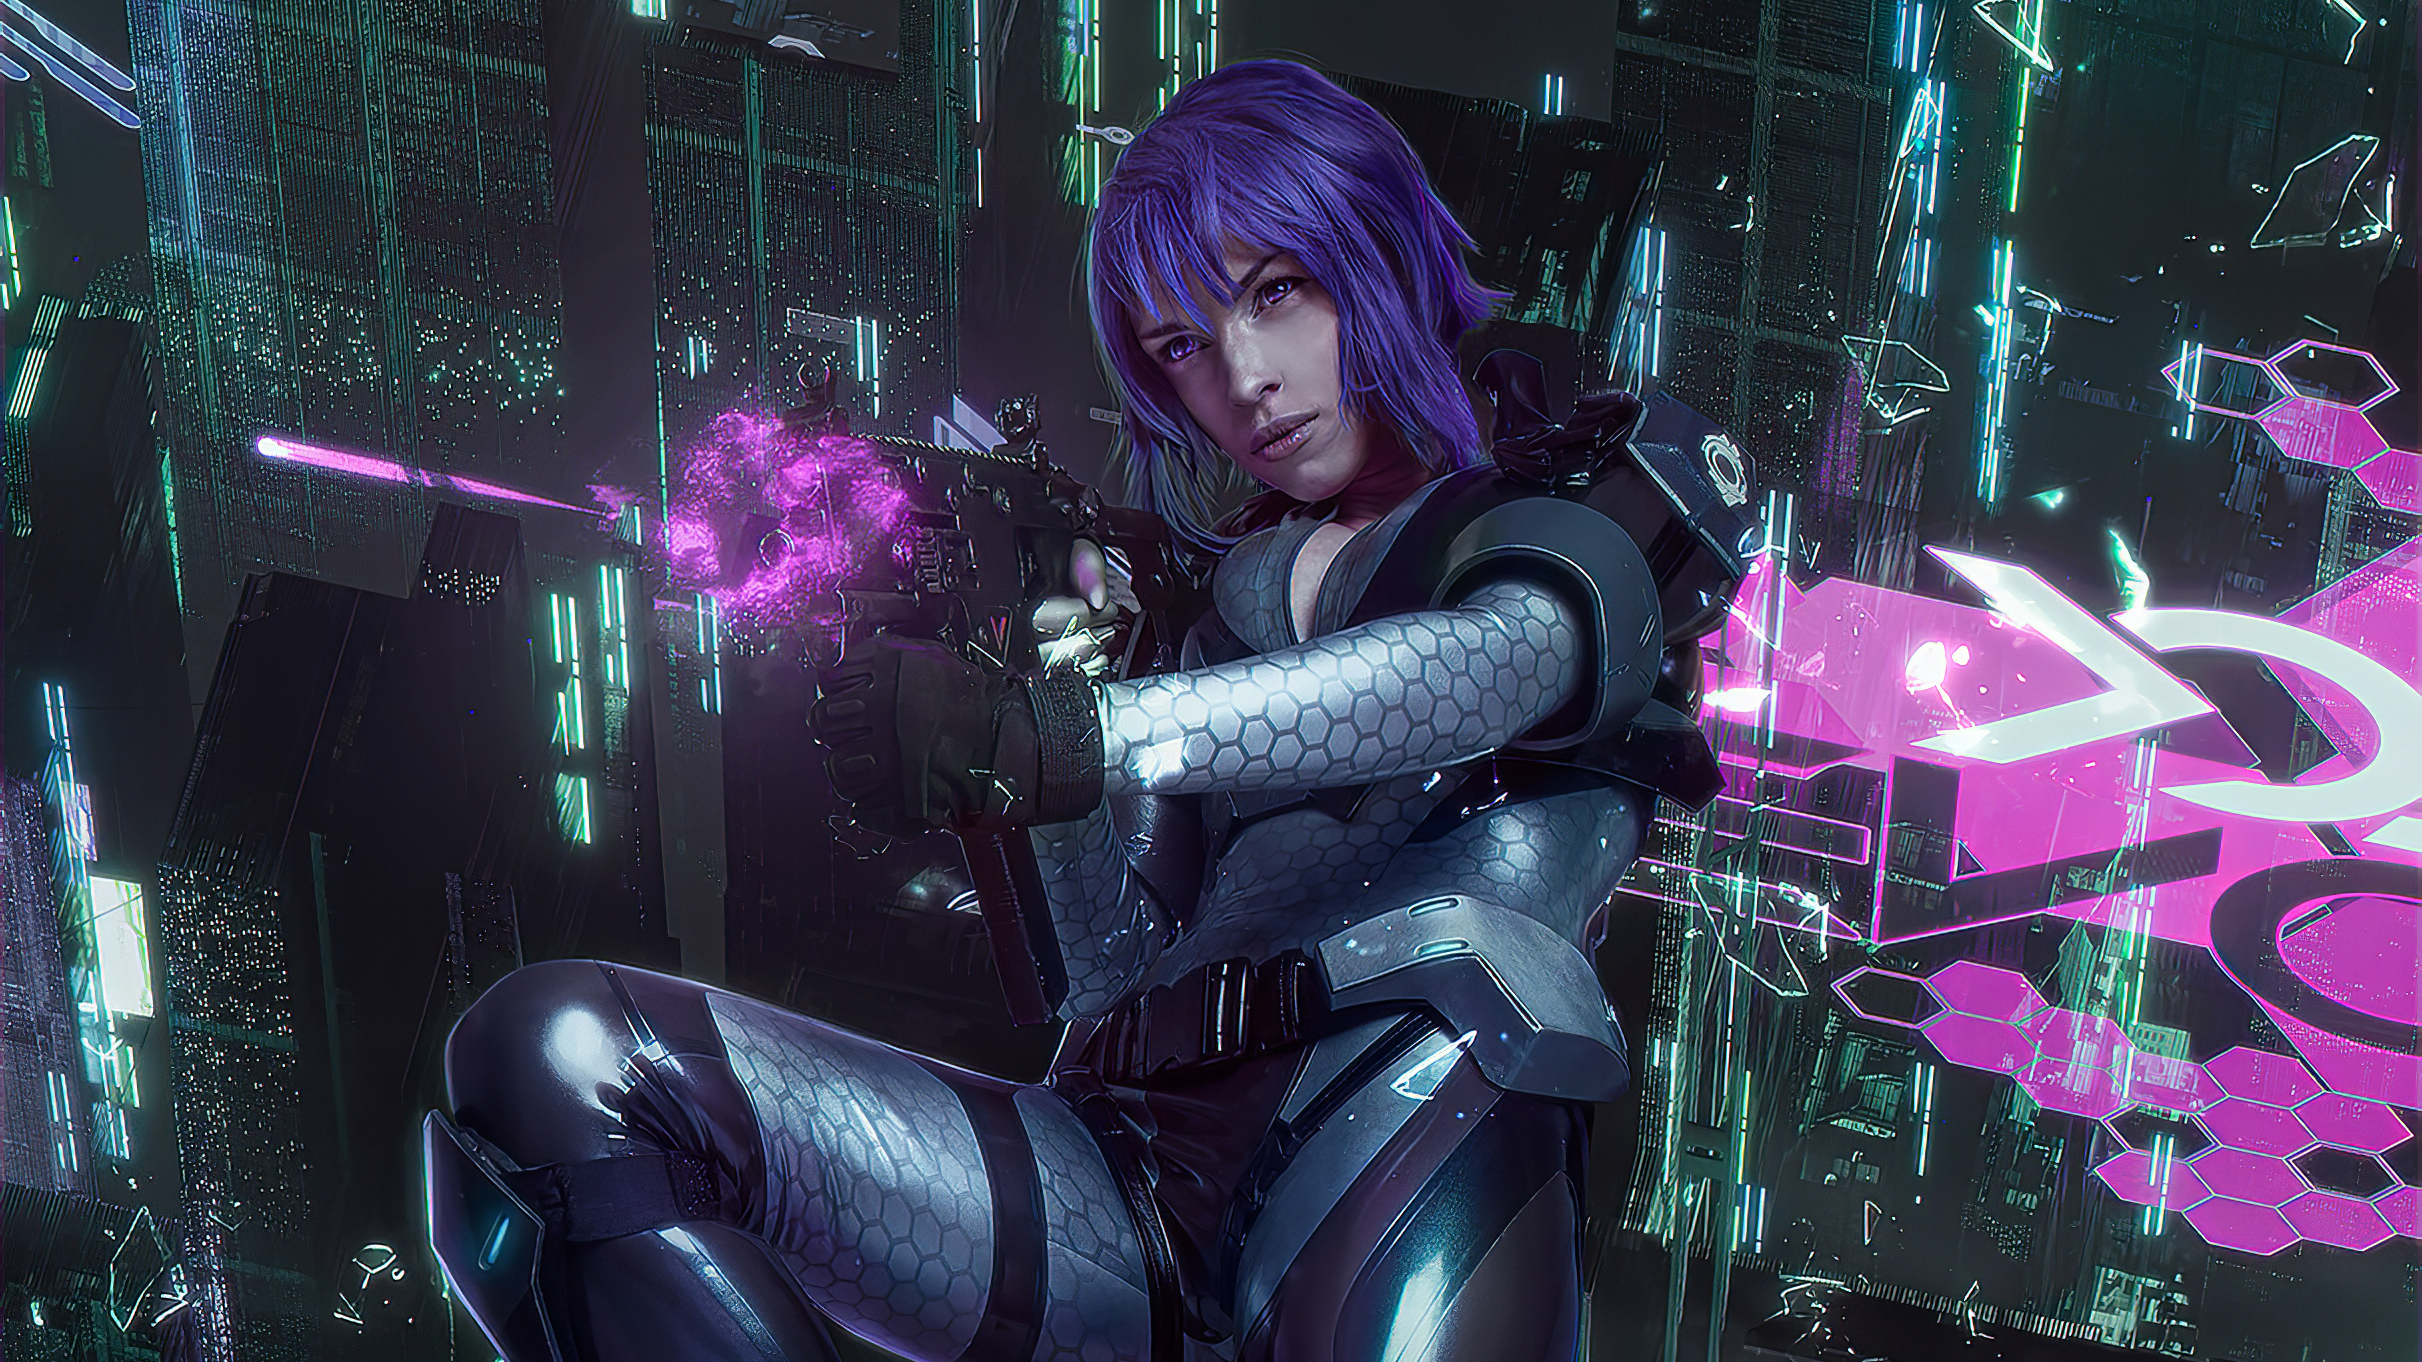 Purple Hair Cyber Punk Girl, HD Artist, 4k Wallpaper, Image, Background, Photo and Picture